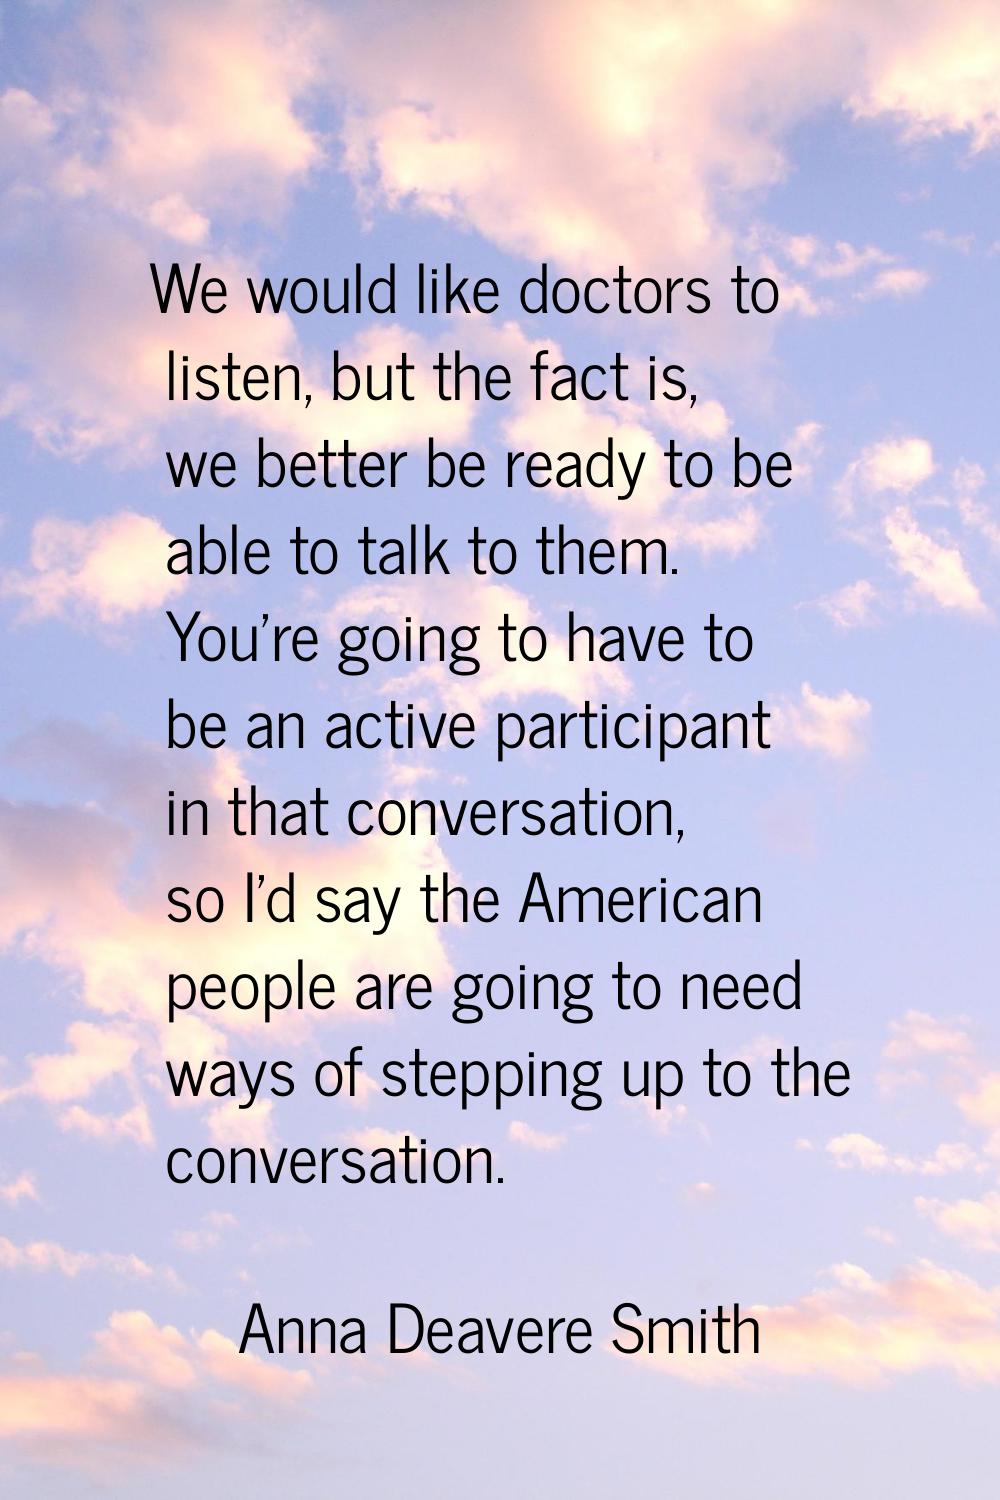 We would like doctors to listen, but the fact is, we better be ready to be able to talk to them. Yo